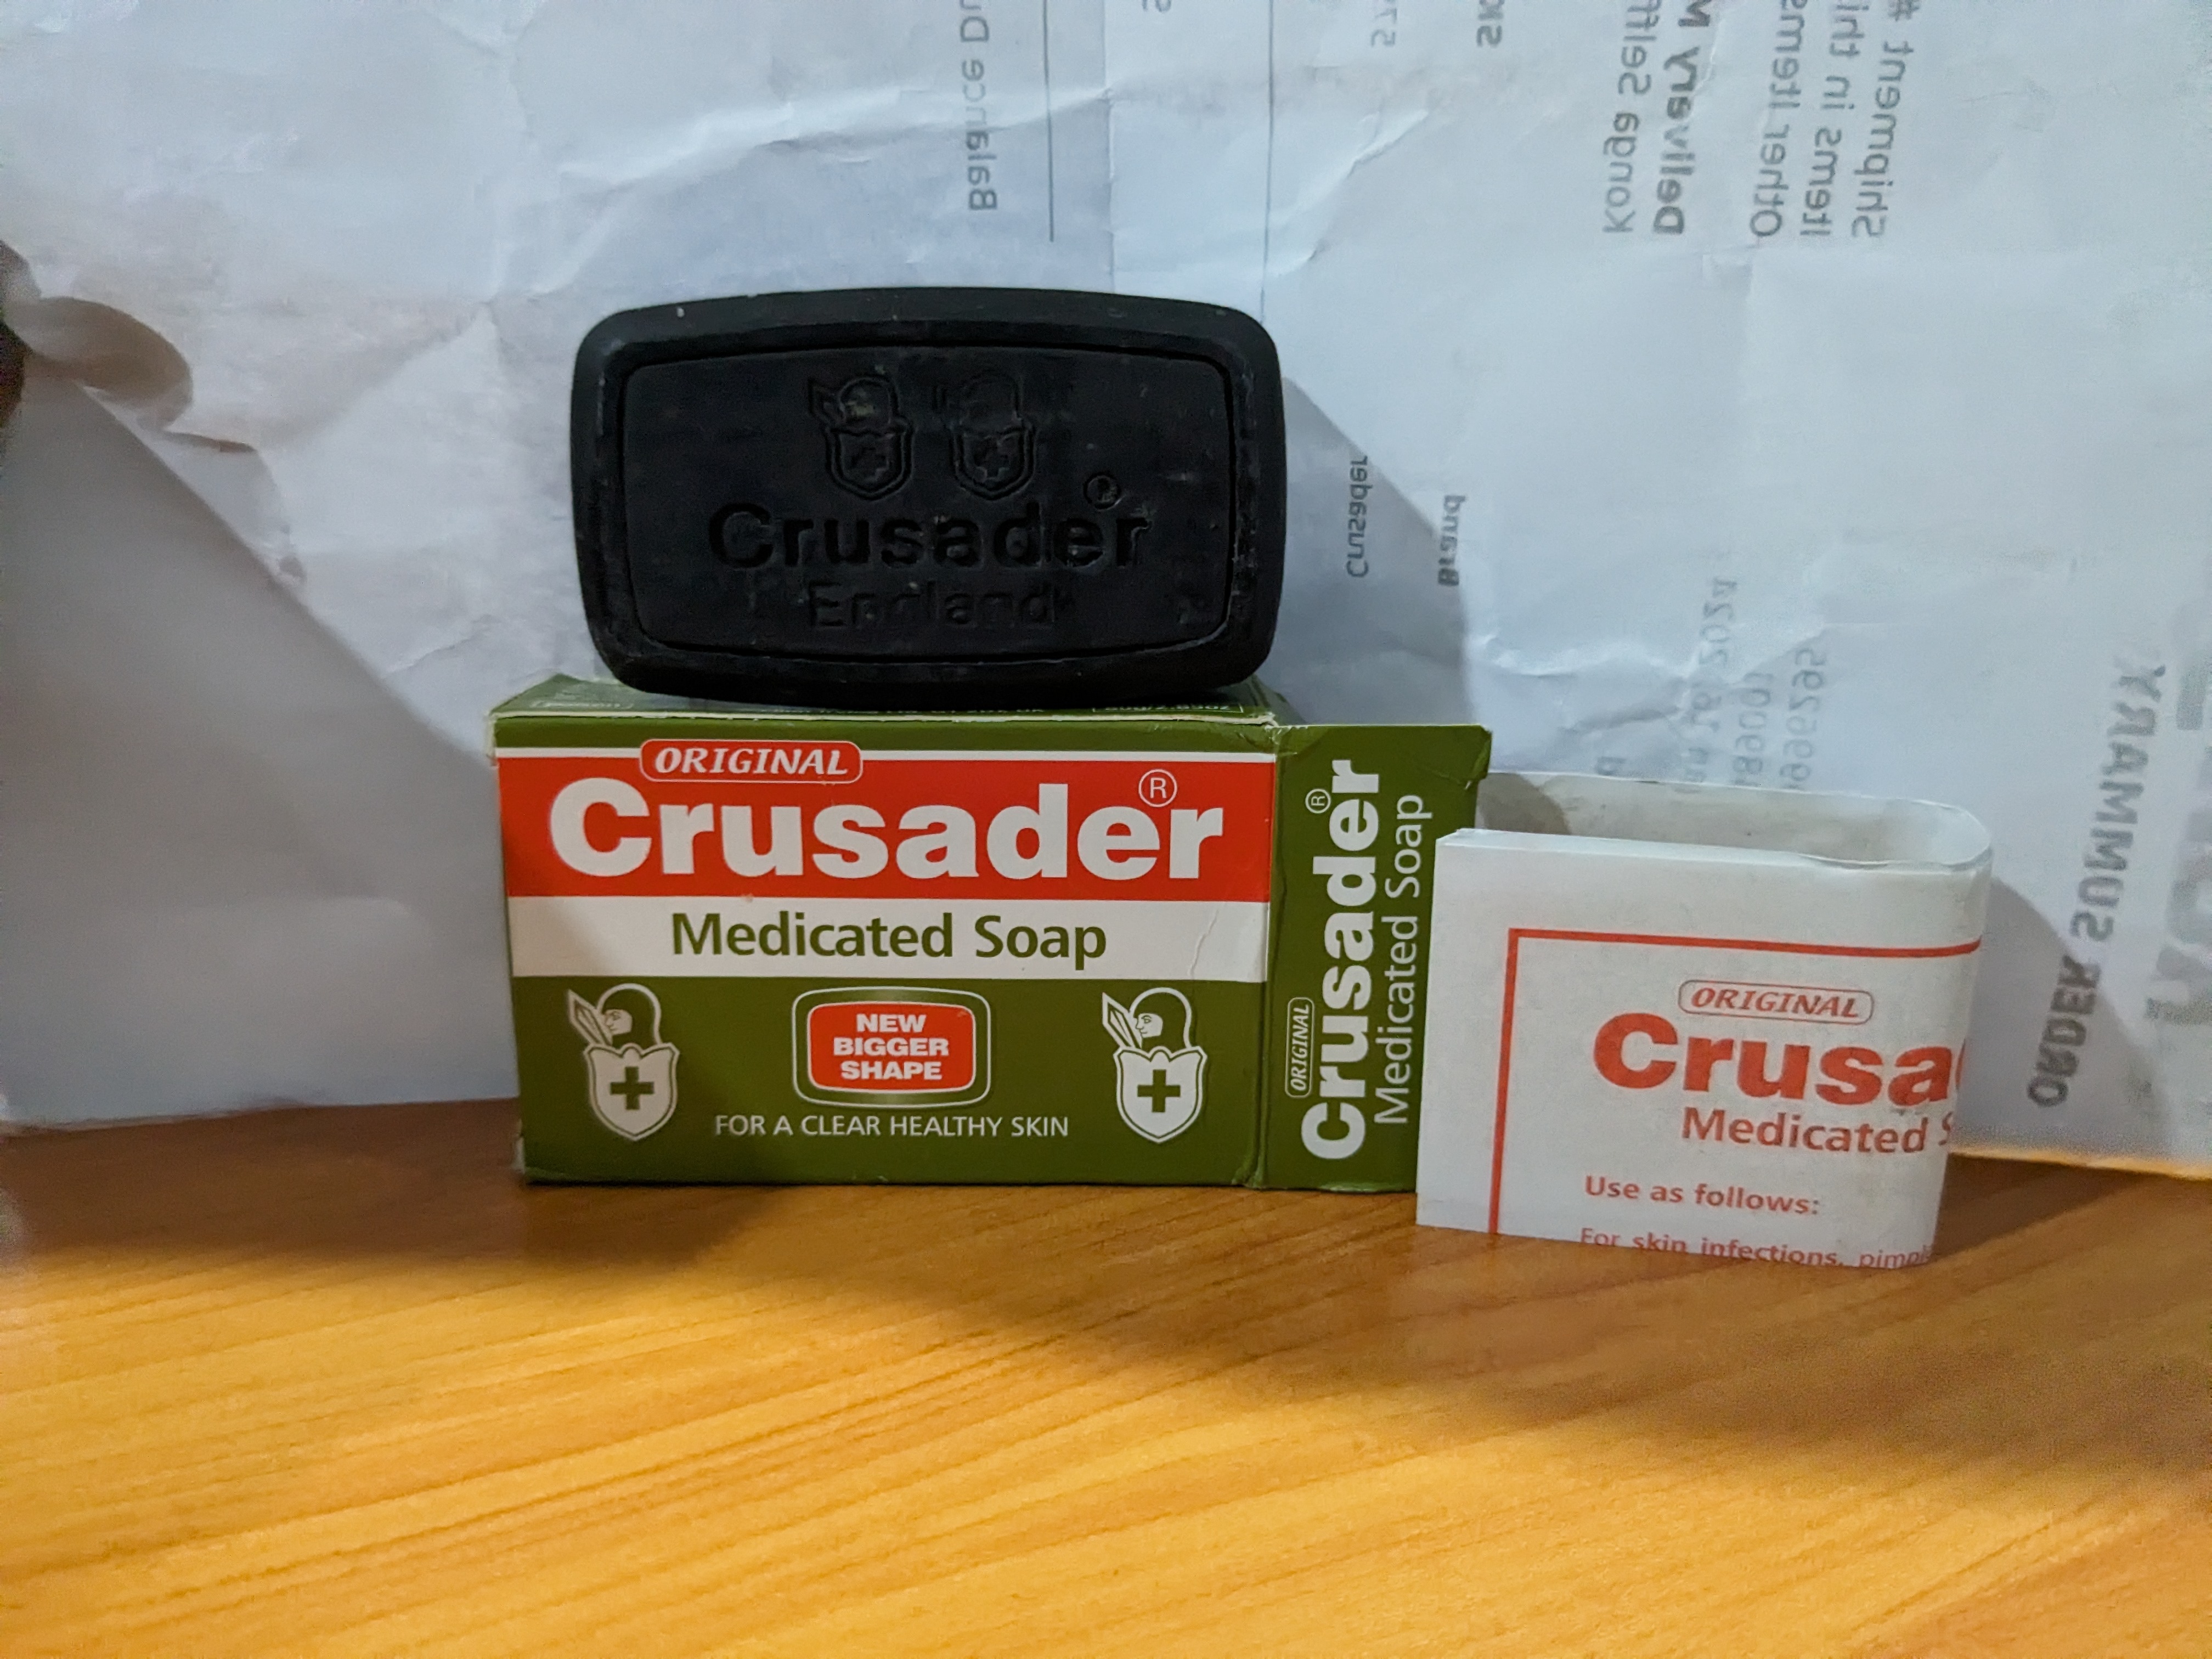 EXPOSED: Crusader, Cancer-Causing Soap Banned by NAFDAC, Still Sold by Jumia and Konga